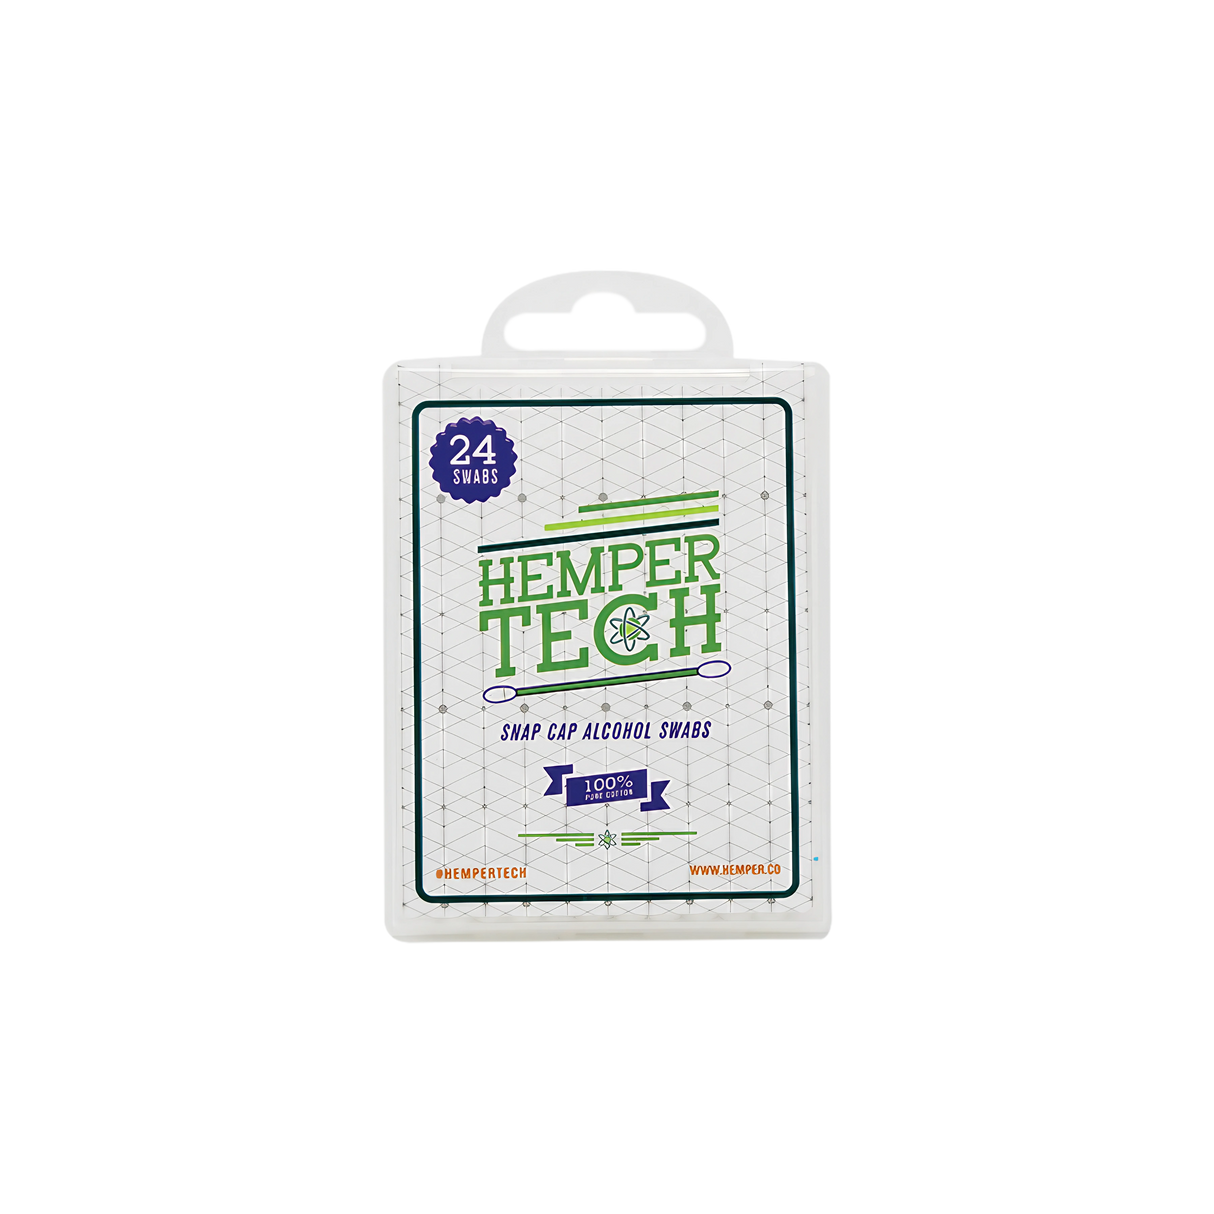 Hemper Tech Snapcap Alcohol Swabs pack front view on a white background